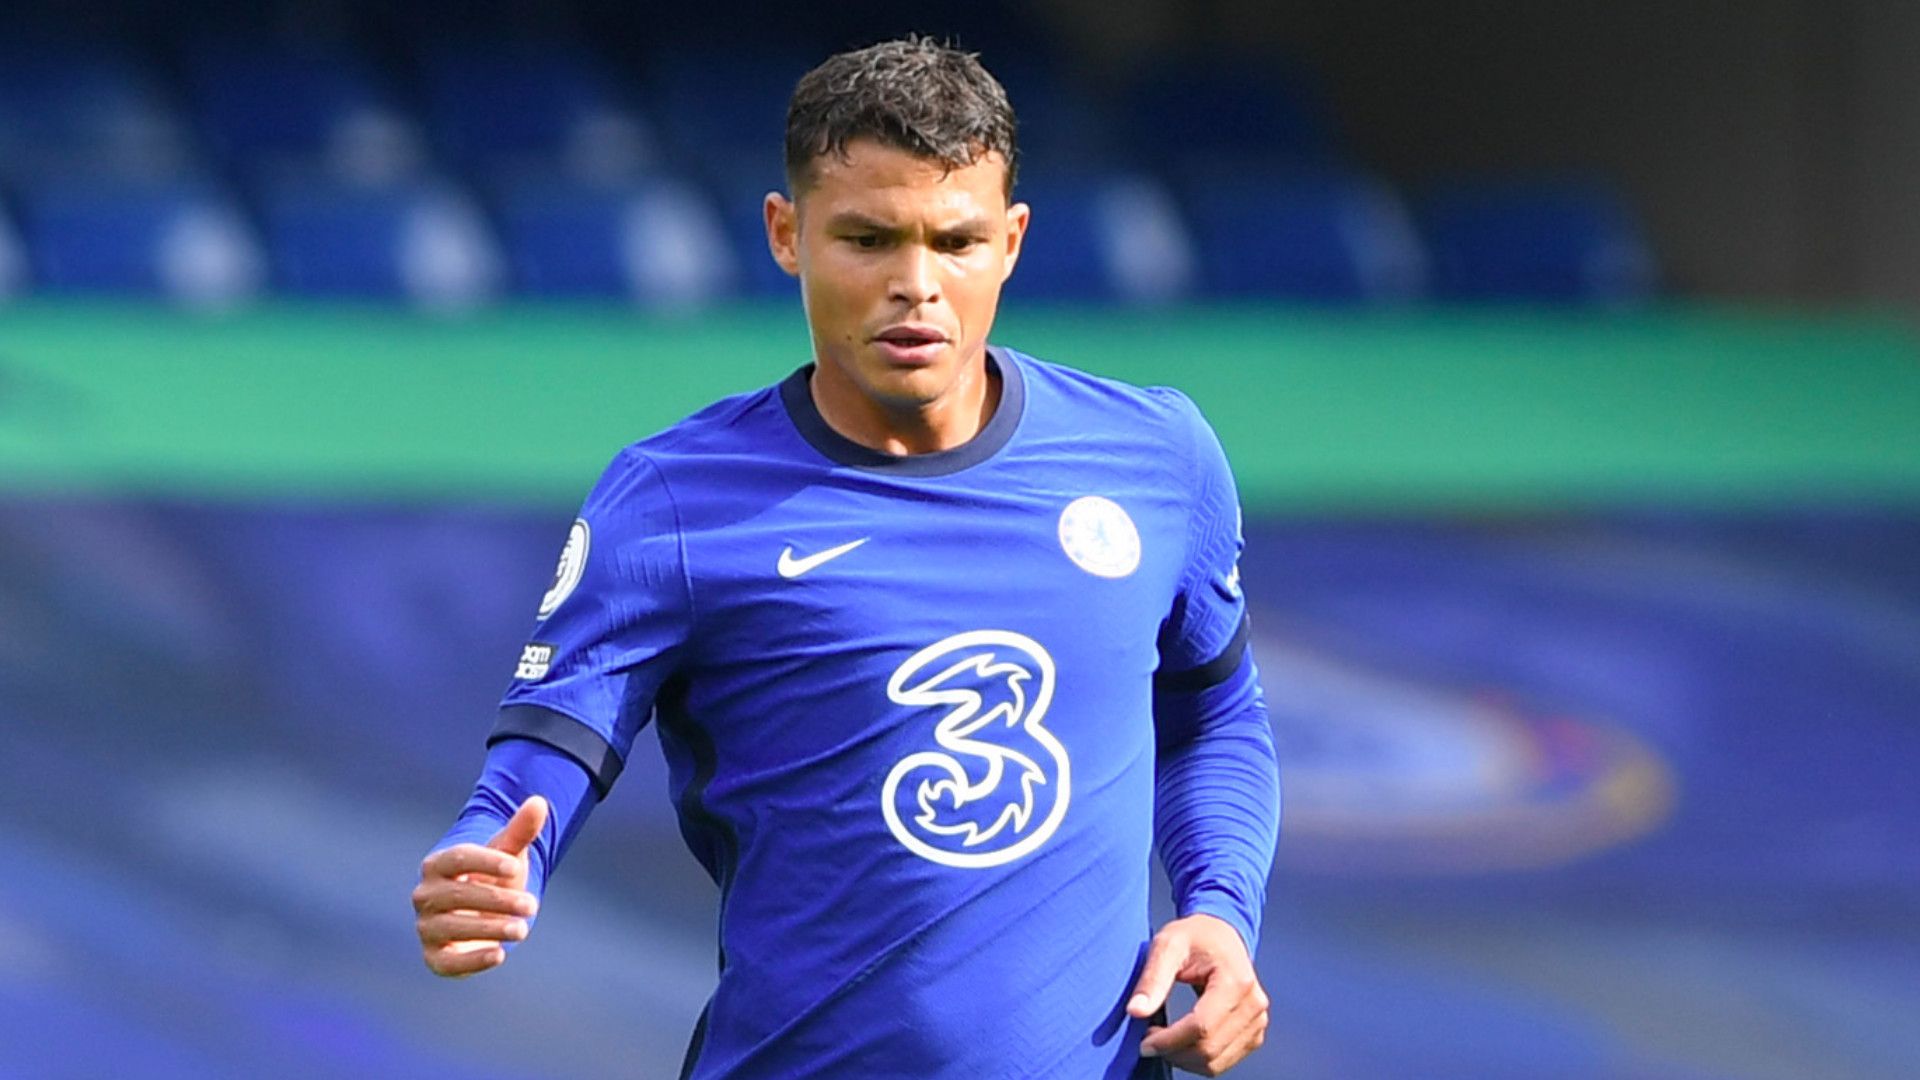 Thiago Silva has got everything!' 'excited to learn from' Chelsea's summer signing